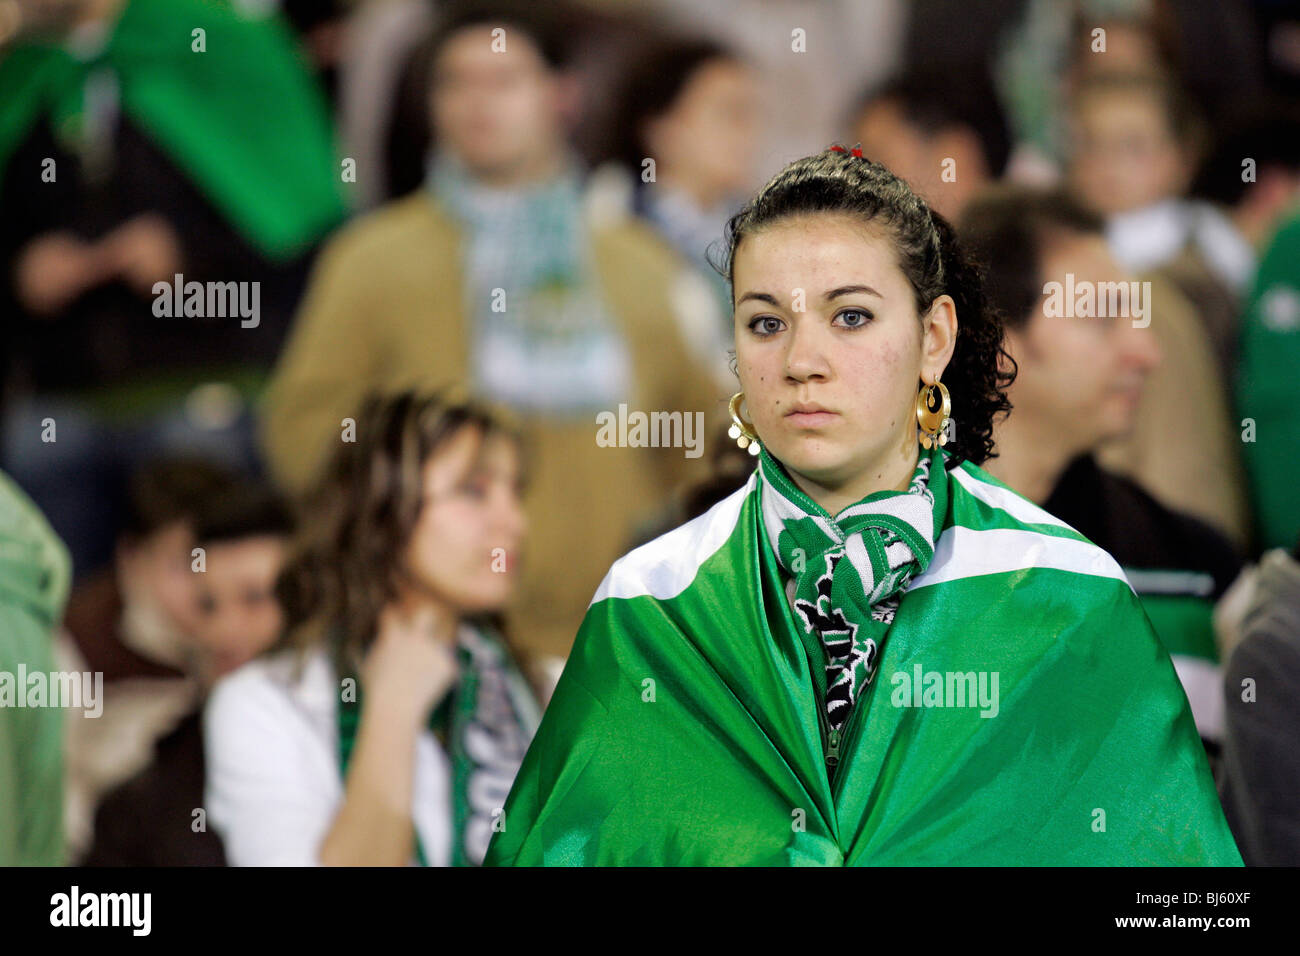 Real Betis Balompie Stock Photos & Real Betis Balompie Stock Images - Alamy